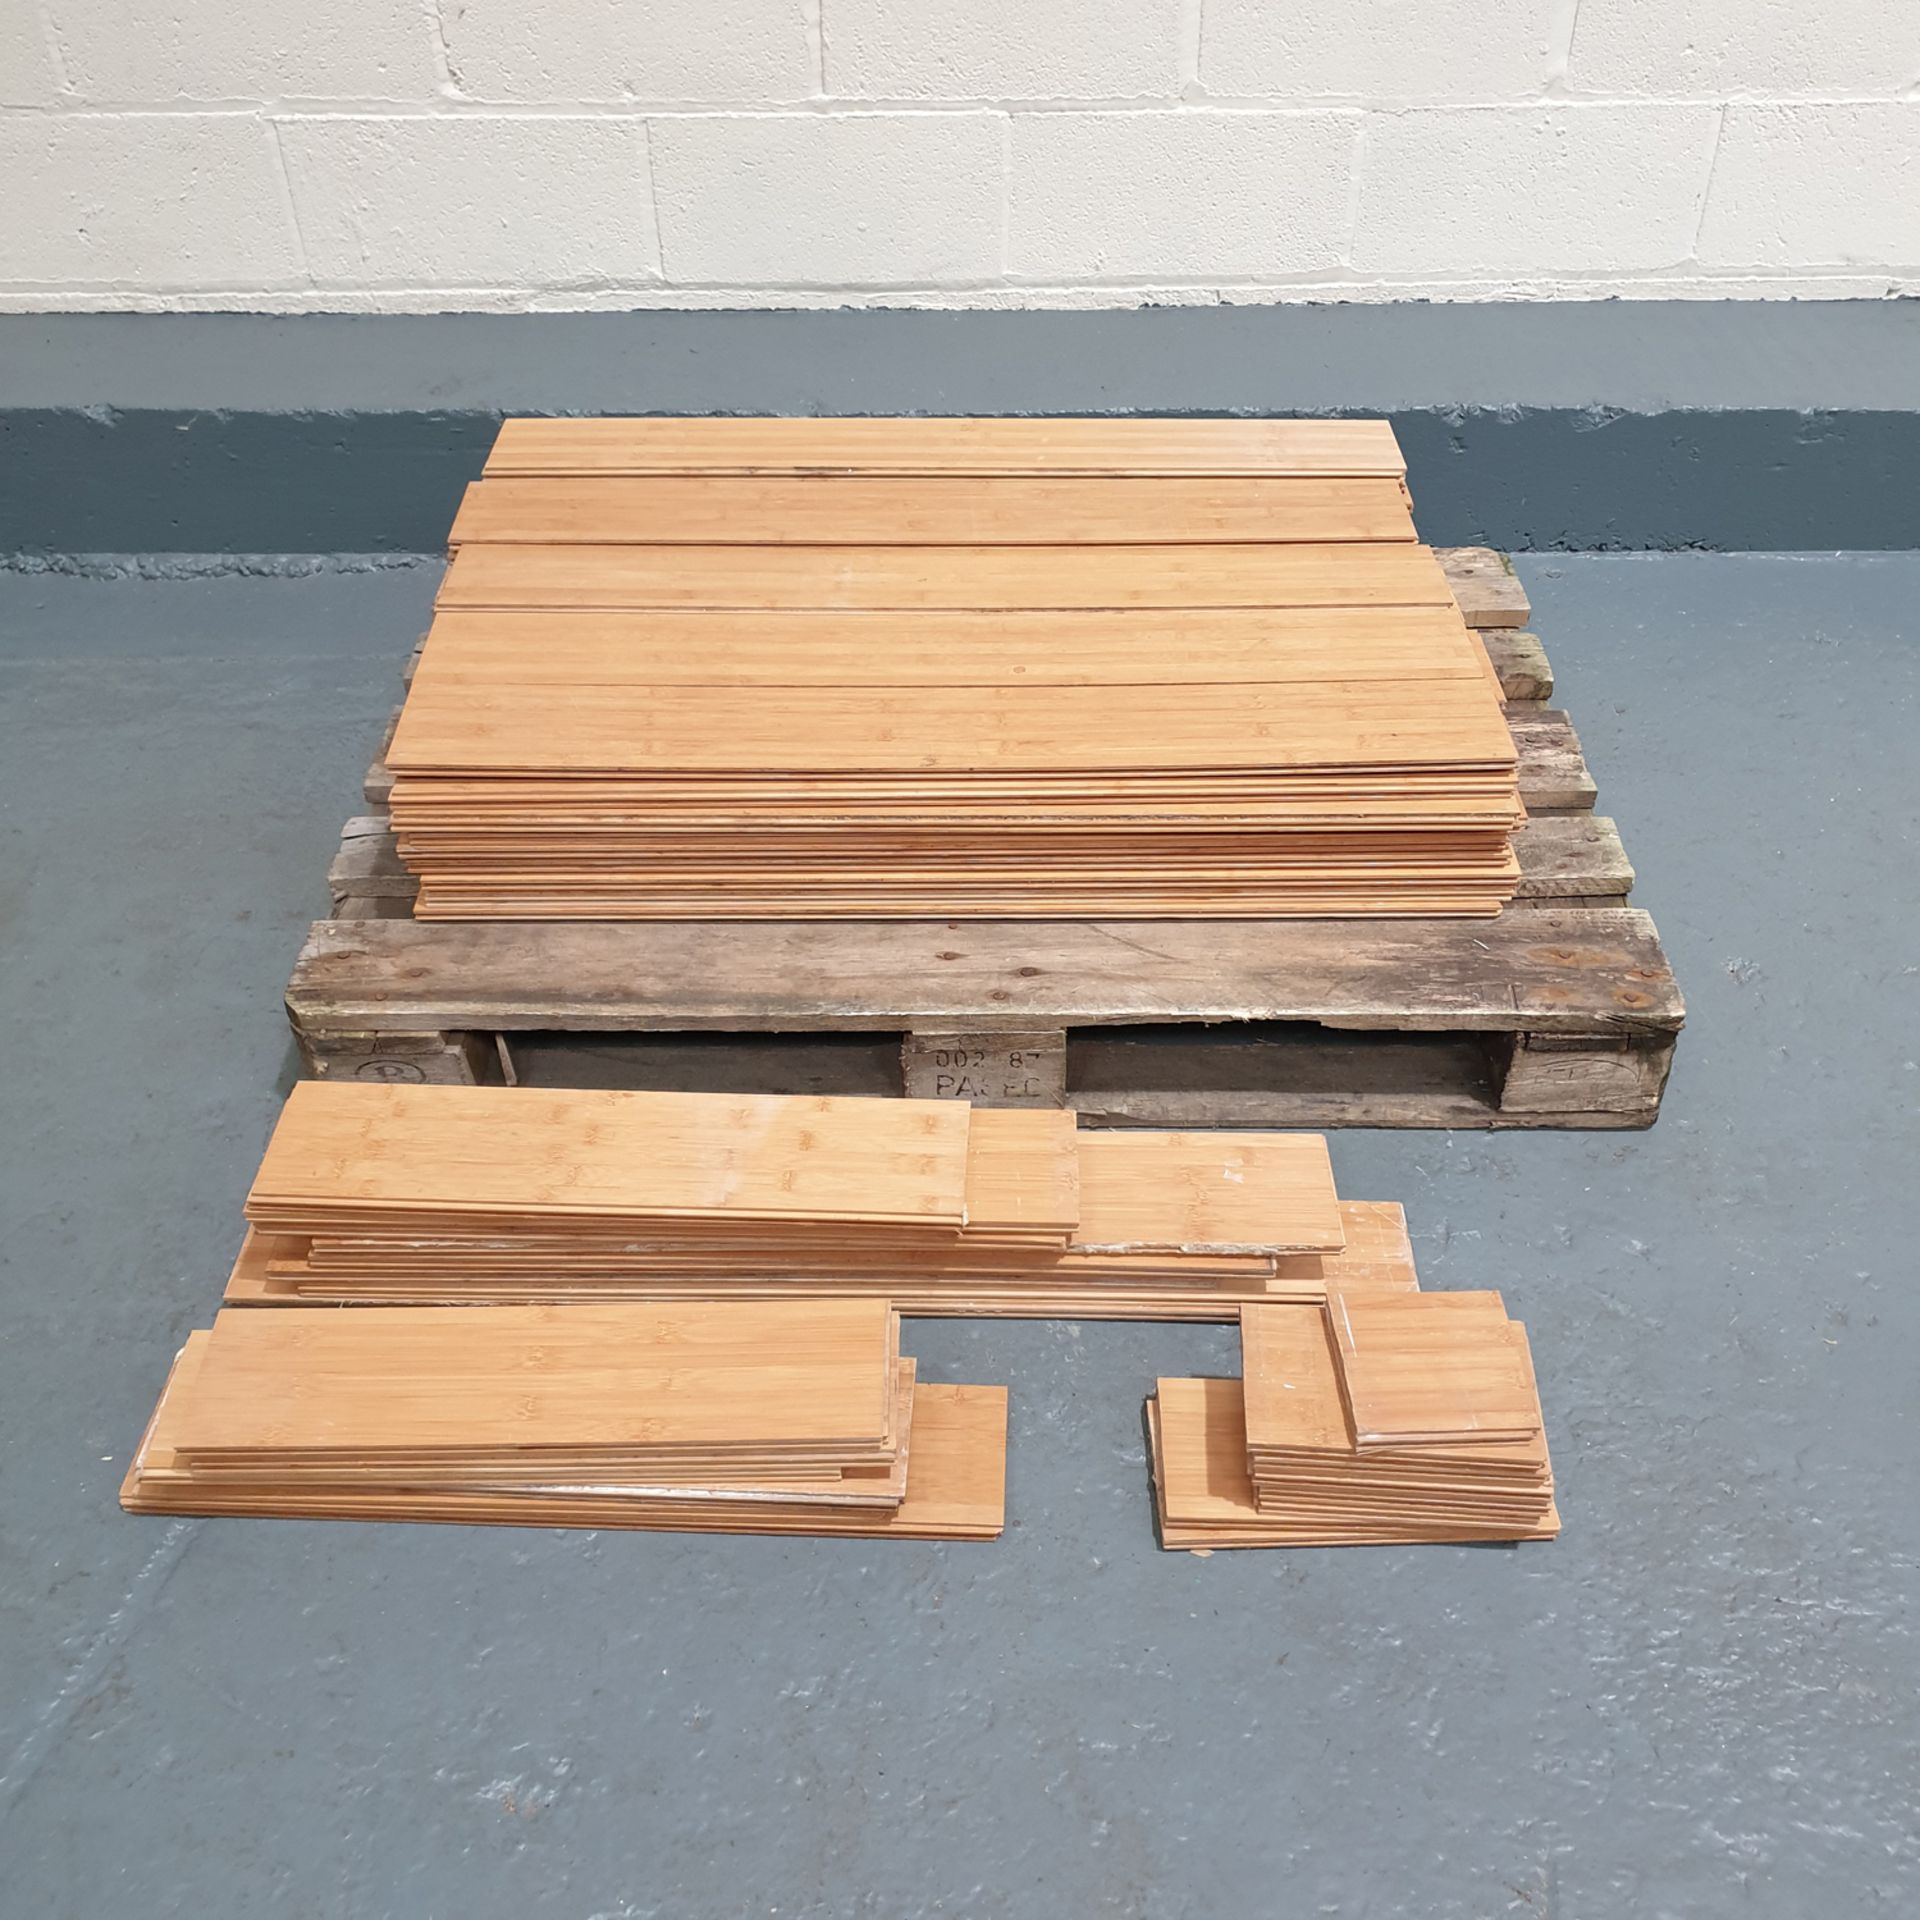 Hard Wood Flooring (Ply) With Additional Off Cuts. Approx 5 Square Meters.